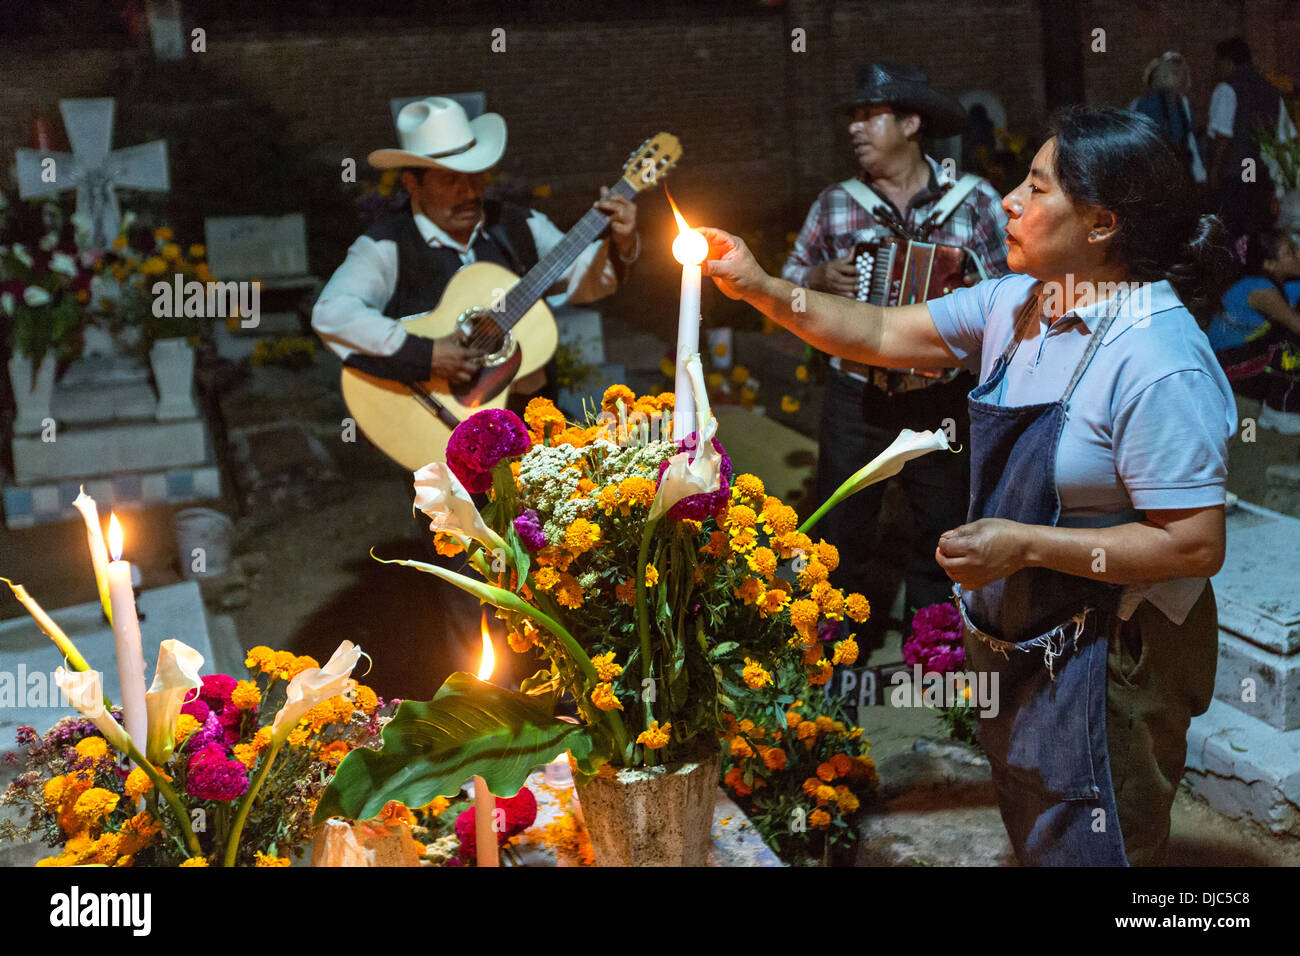 A Mexican woman lights a candle at the gravesite of relatives as a mariachi band plays for Day of the Dead festival. Stock Photo